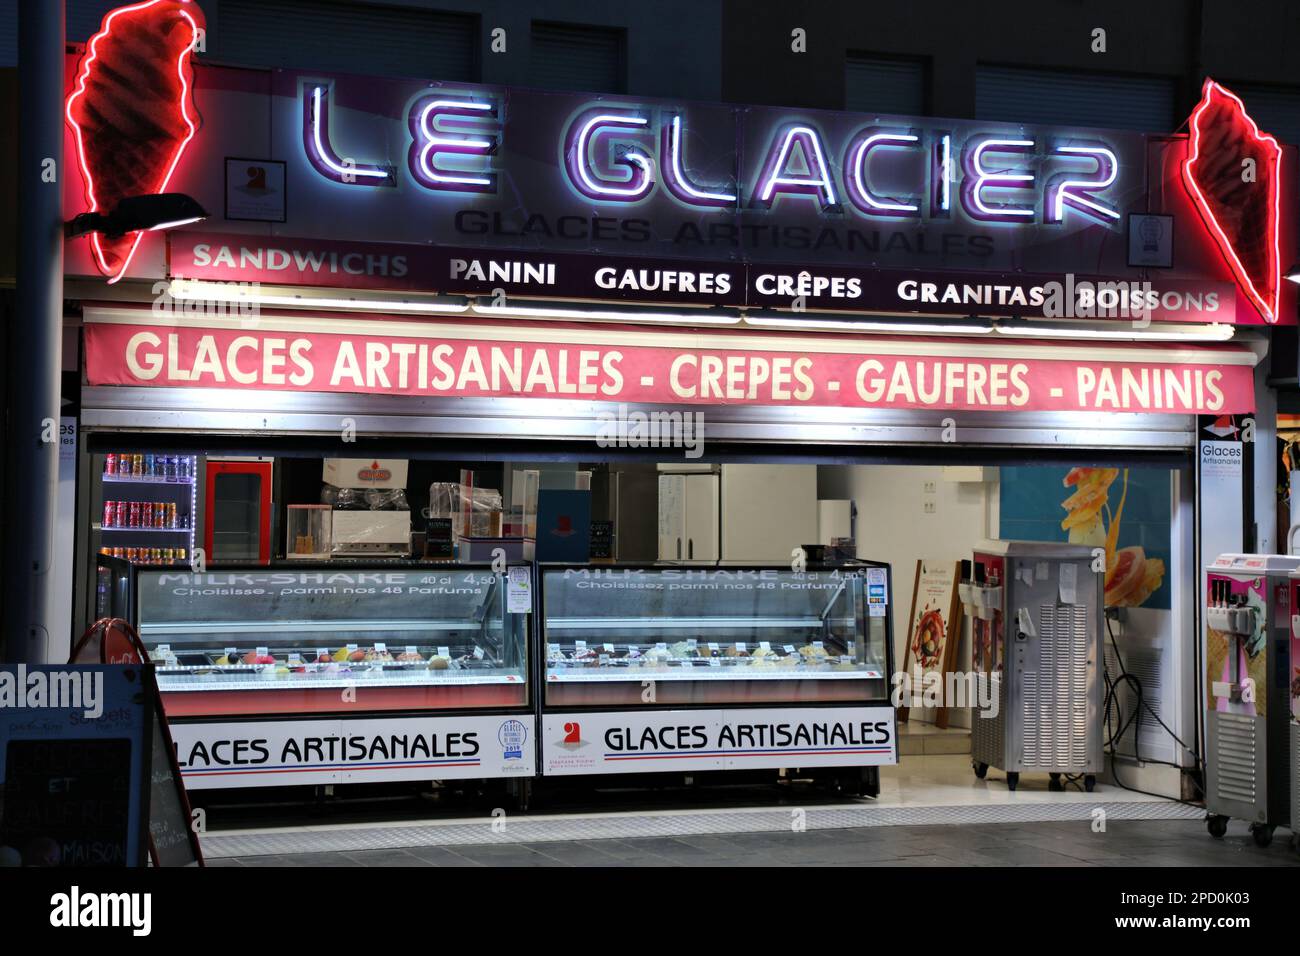 CAP D'AGDE, FRANCE - OCTOBER 2, 2021: Evening street view of a local ice cream parlor of Cap d'Agde resort in Occitanie region of France. Stock Photo